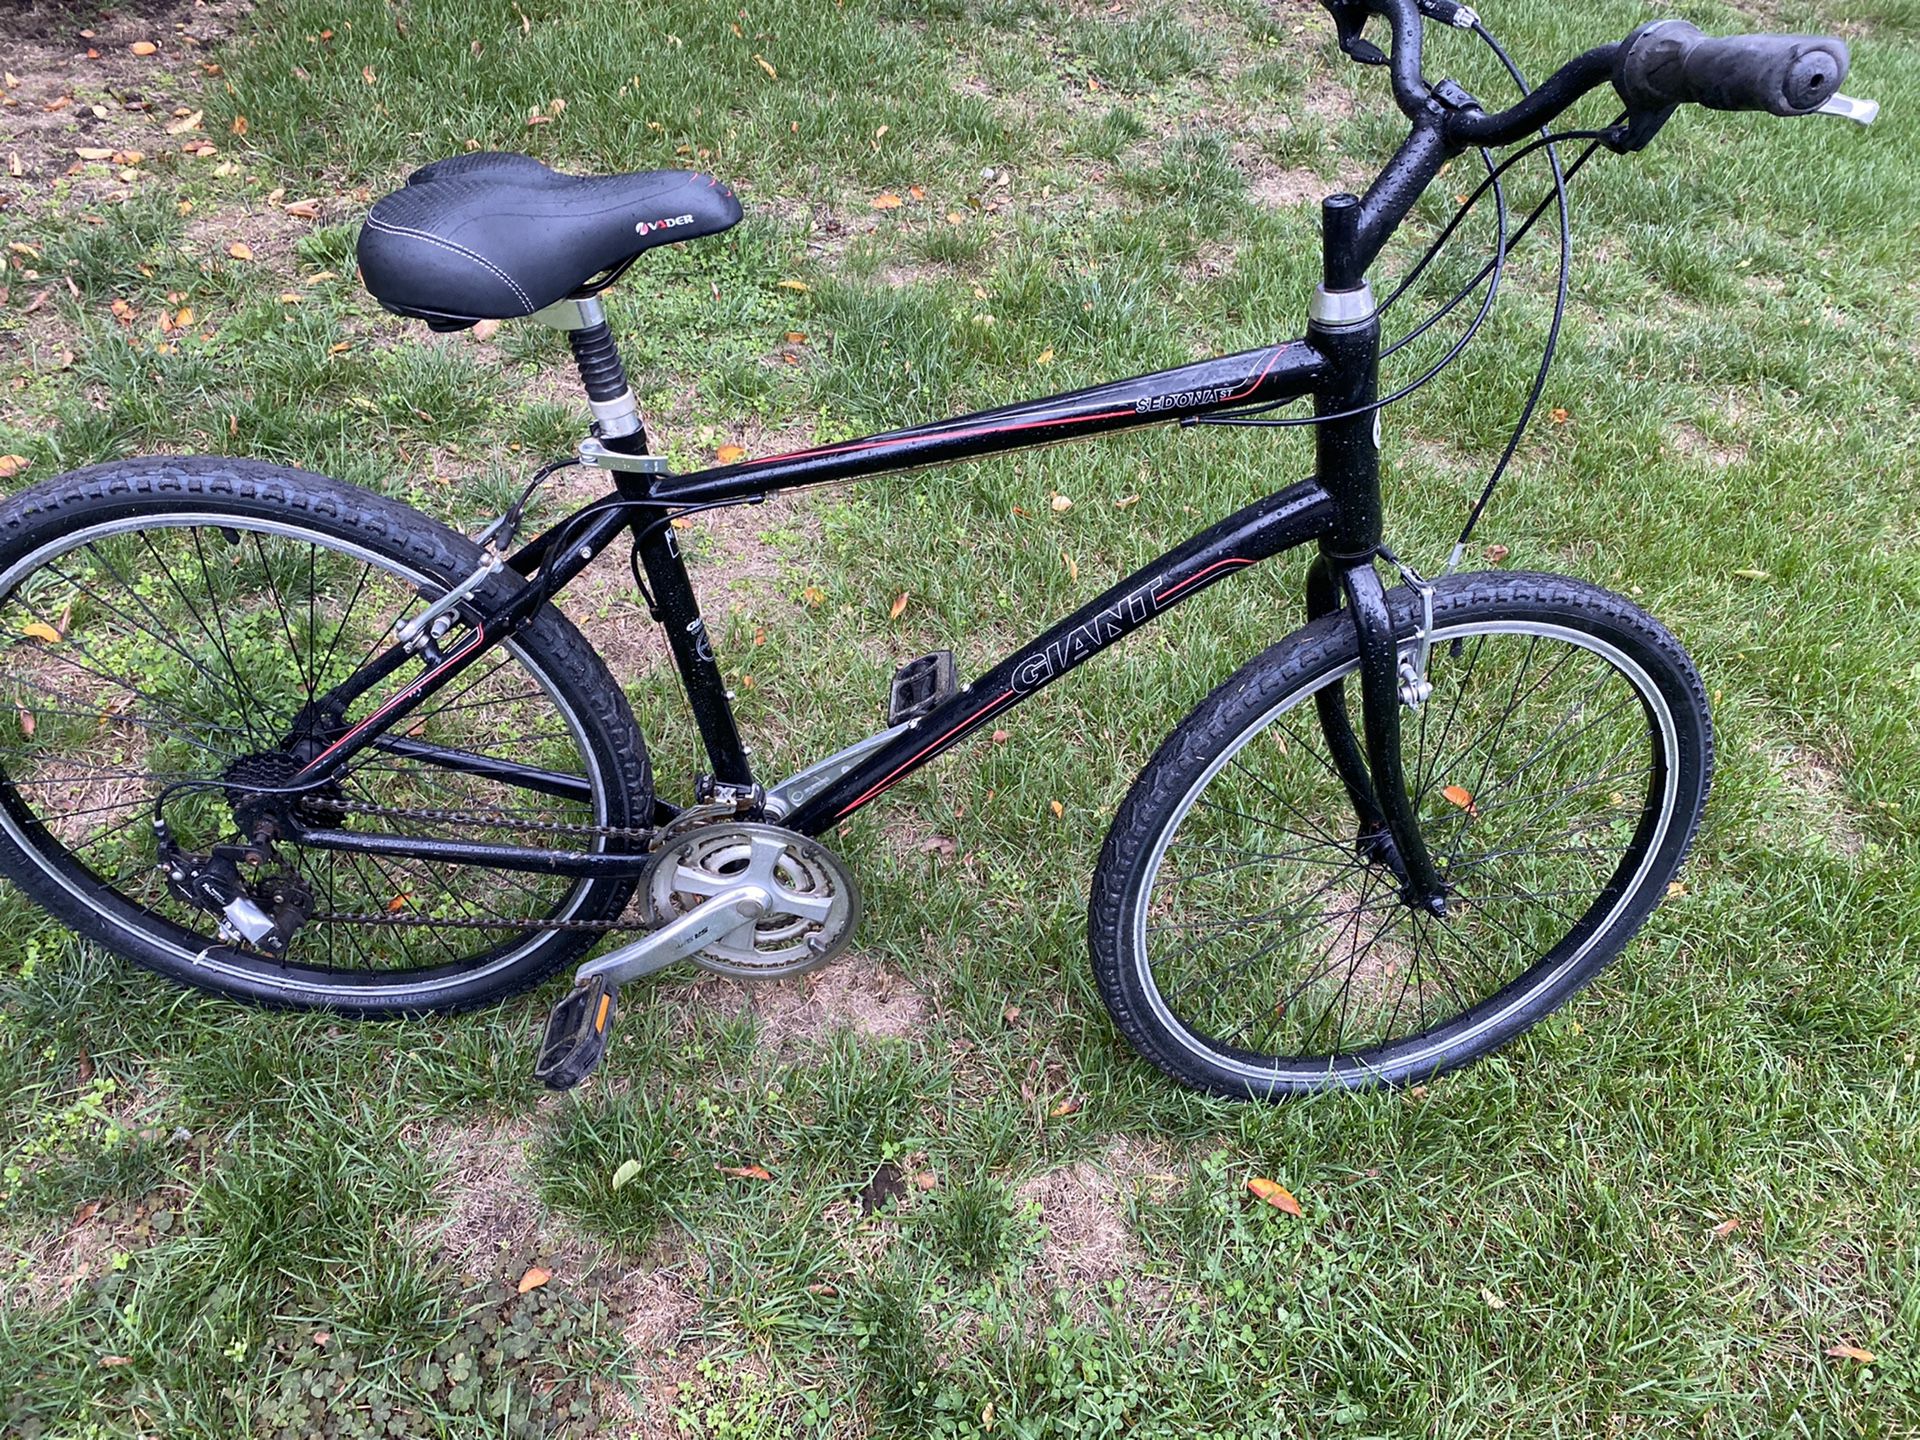 Giant mountain bike great condition medium size 26” wheels bicycle